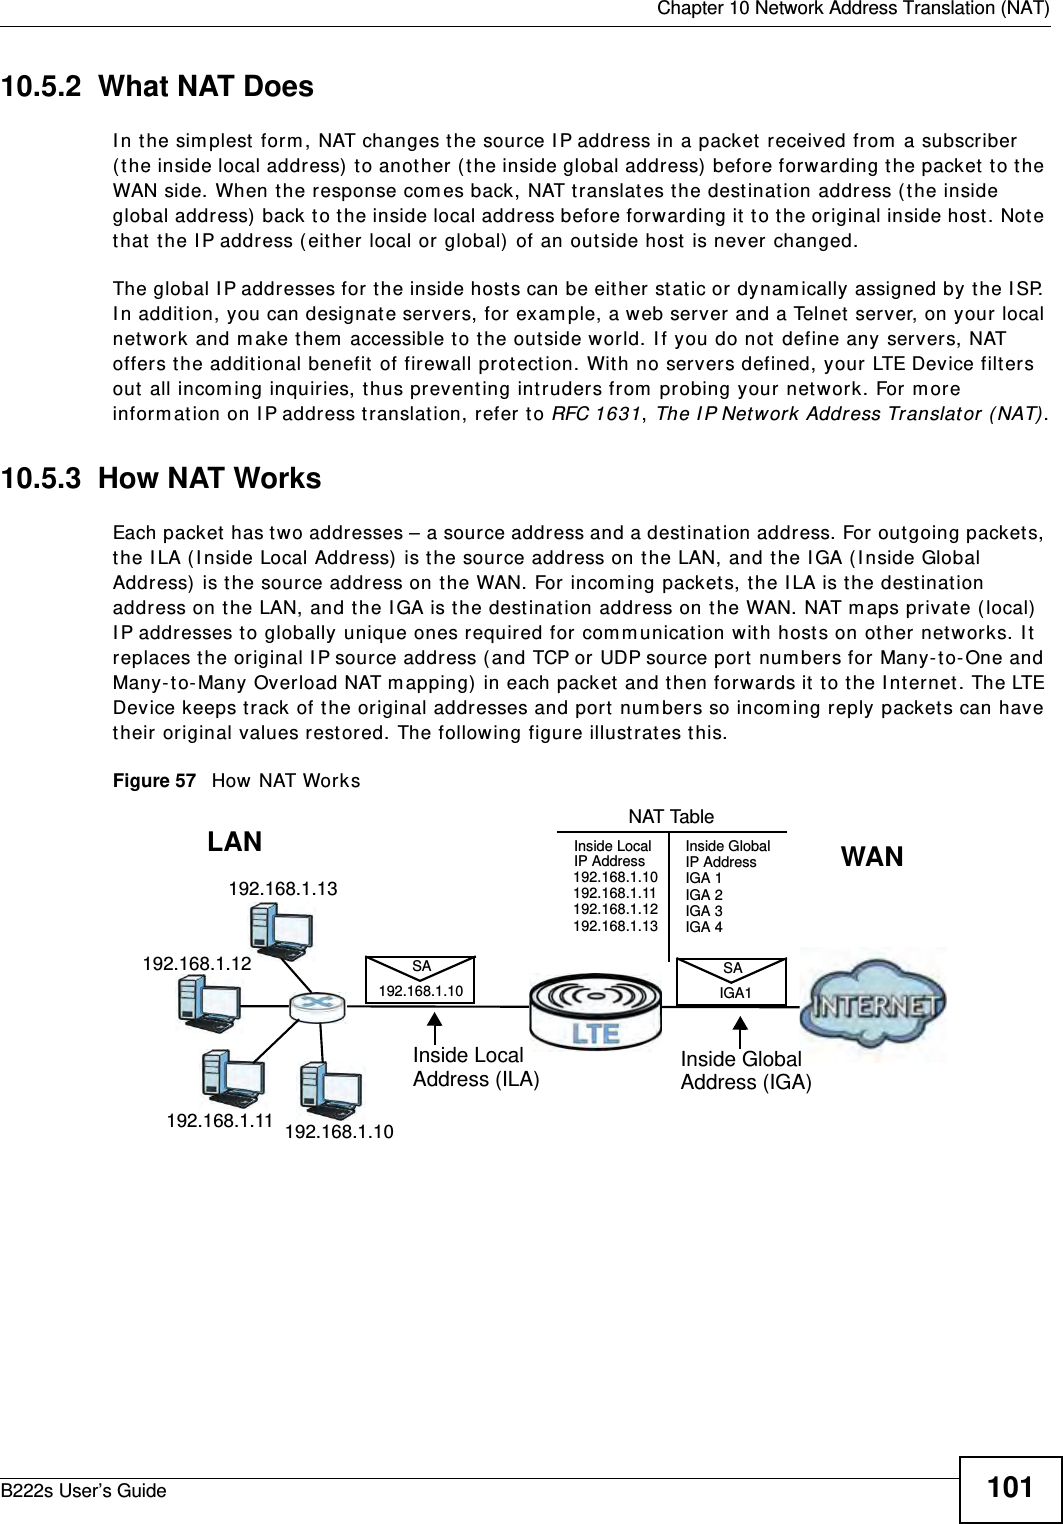  Chapter 10 Network Address Translation (NAT)B222s User’s Guide 10110.5.2  What NAT DoesI n t he sim plest form , NAT changes the sour ce I P address in a packet  received from  a subscriber ( t he inside local address)  t o anot her ( the inside global address)  before forwarding t he packet t o t he WAN side. When t he response com es back, NAT t ranslat es the destinat ion address ( the inside global addr ess)  back t o t he inside local address before forwarding it  t o t he original inside host . Not e that  t he I P address ( eit her local or global) of an out side host  is never changed.The global I P addresses for t he inside hosts can be eit her st atic or dynam ically assigned by t he I SP. I n addit ion, you can designat e servers, for exam ple, a web ser ver and a Telnet  server, on your local network and m ake t hem  accessible t o the outside world. I f you do not  define any servers, NAT offers t he additional benefit  of firewall prot ection. With no servers defined, your LTE Device filt ers out  all incom ing inquiries, t hus prevent ing int ruders from  probing your net work. For m ore inform ation on I P address t ranslat ion, refer to RFC 1631, The I P Network Address Translator ( NAT) .10.5.3  How NAT WorksEach packet has t wo addresses – a sour ce address and a destinat ion address. For outgoing packet s, the I LA ( I nside Local Address)  is the source address on t he LAN, and t he I GA ( I nside Global Address)  is t he source address on t he WAN. For incom ing packets, t he I LA is the dest inat ion address on t he LAN, and t he I GA is t he dest ination address on t he WAN. NAT m aps privat e ( local)  I P addr esses t o globally unique ones r equired for com m unication wit h hosts on ot her networks. I t replaces t he original I P source address ( and TCP or UDP source port  num bers for Many- to- One and Many-t o-Many Overload NAT m apping)  in each packet and t hen forwards it to t he I nternet . The LTE Device keeps t rack of the original addresses and port  num bers so incom ing reply packet s can have their original values restored. The following figure illust rat es this.Figure 57   How NAT Works192.168.1.13192.168.1.10192.168.1.11192.168.1.12 SA192.168.1.10SAIGA1Inside LocalIP Address192.168.1.10192.168.1.11192.168.1.12192.168.1.13Inside Global IP AddressIGA 1IGA 2IGA 3IGA 4NAT TableWANLANInside LocalAddress (ILA)Inside GlobalAddress (IGA)